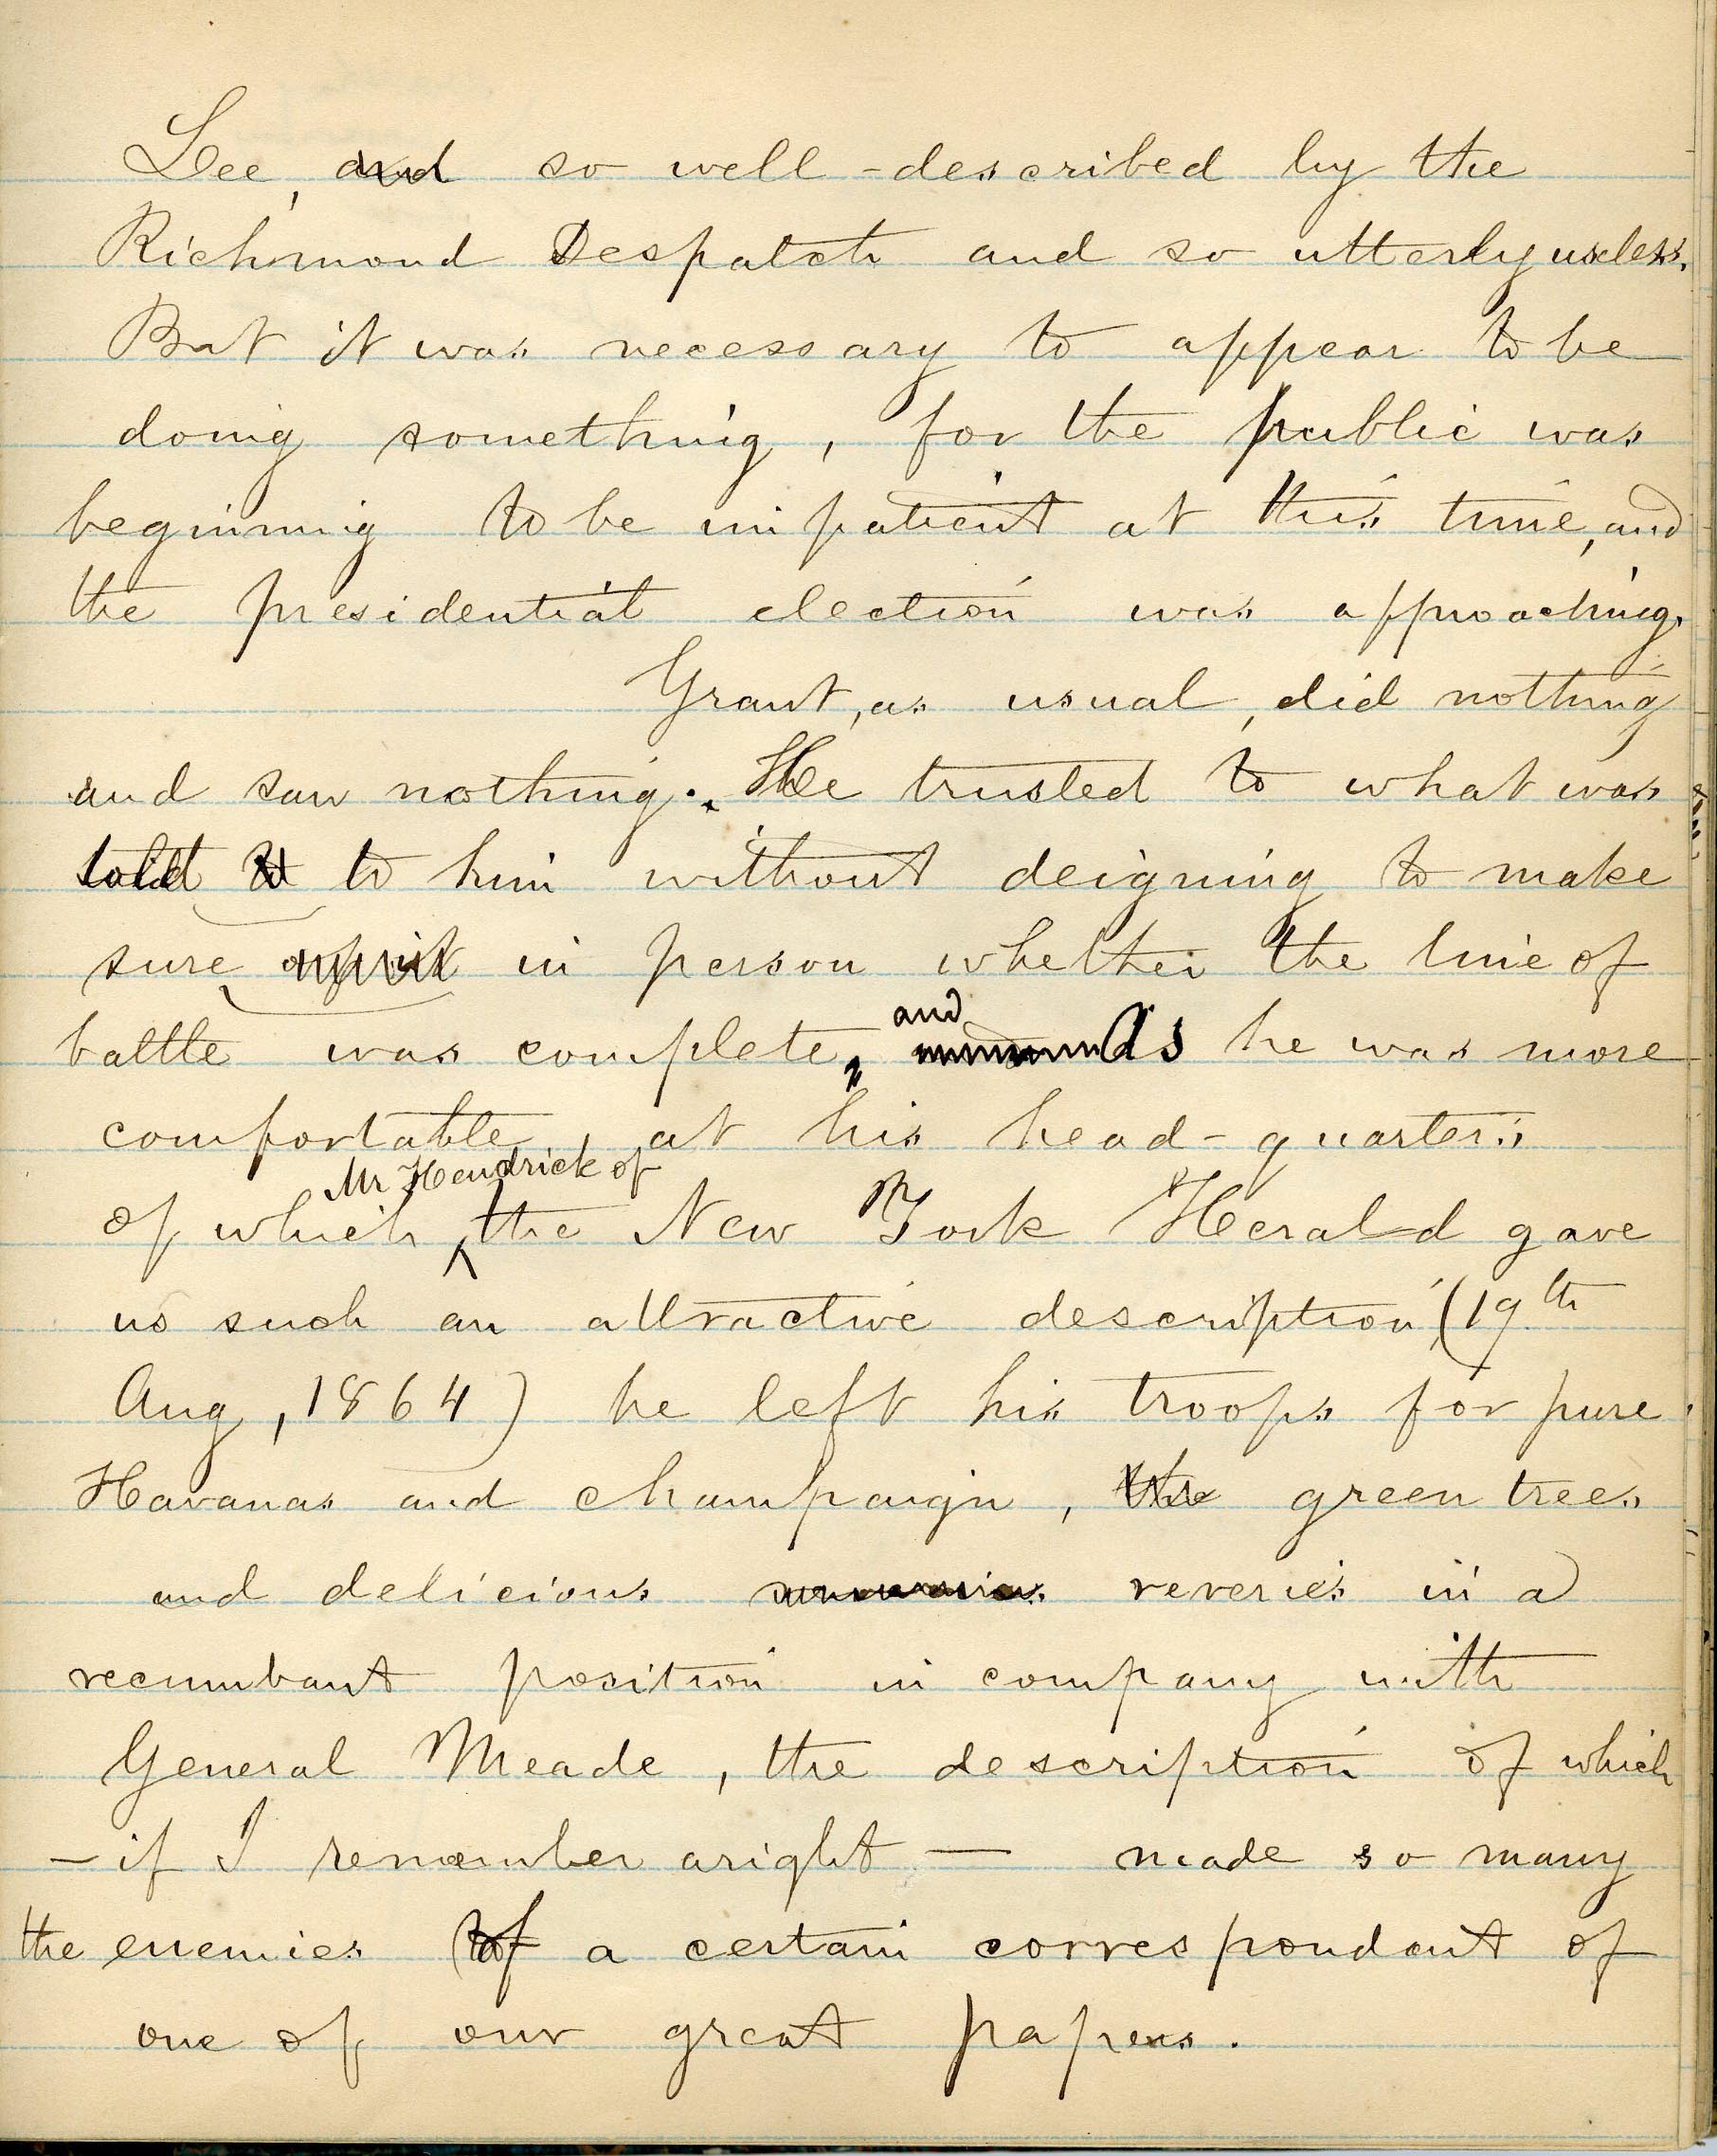 Typical of the writer's charges against Grant is this passage, in which he charges Grant with absenting himself from his duties: "Grant, as usual, did nothing and saw nothing. . , as he was more comfortable at his head-quarters. . . he left his troops for pure Havans and champaign [sic], the green tree and delicious reveries in a recumbant [sic] position...